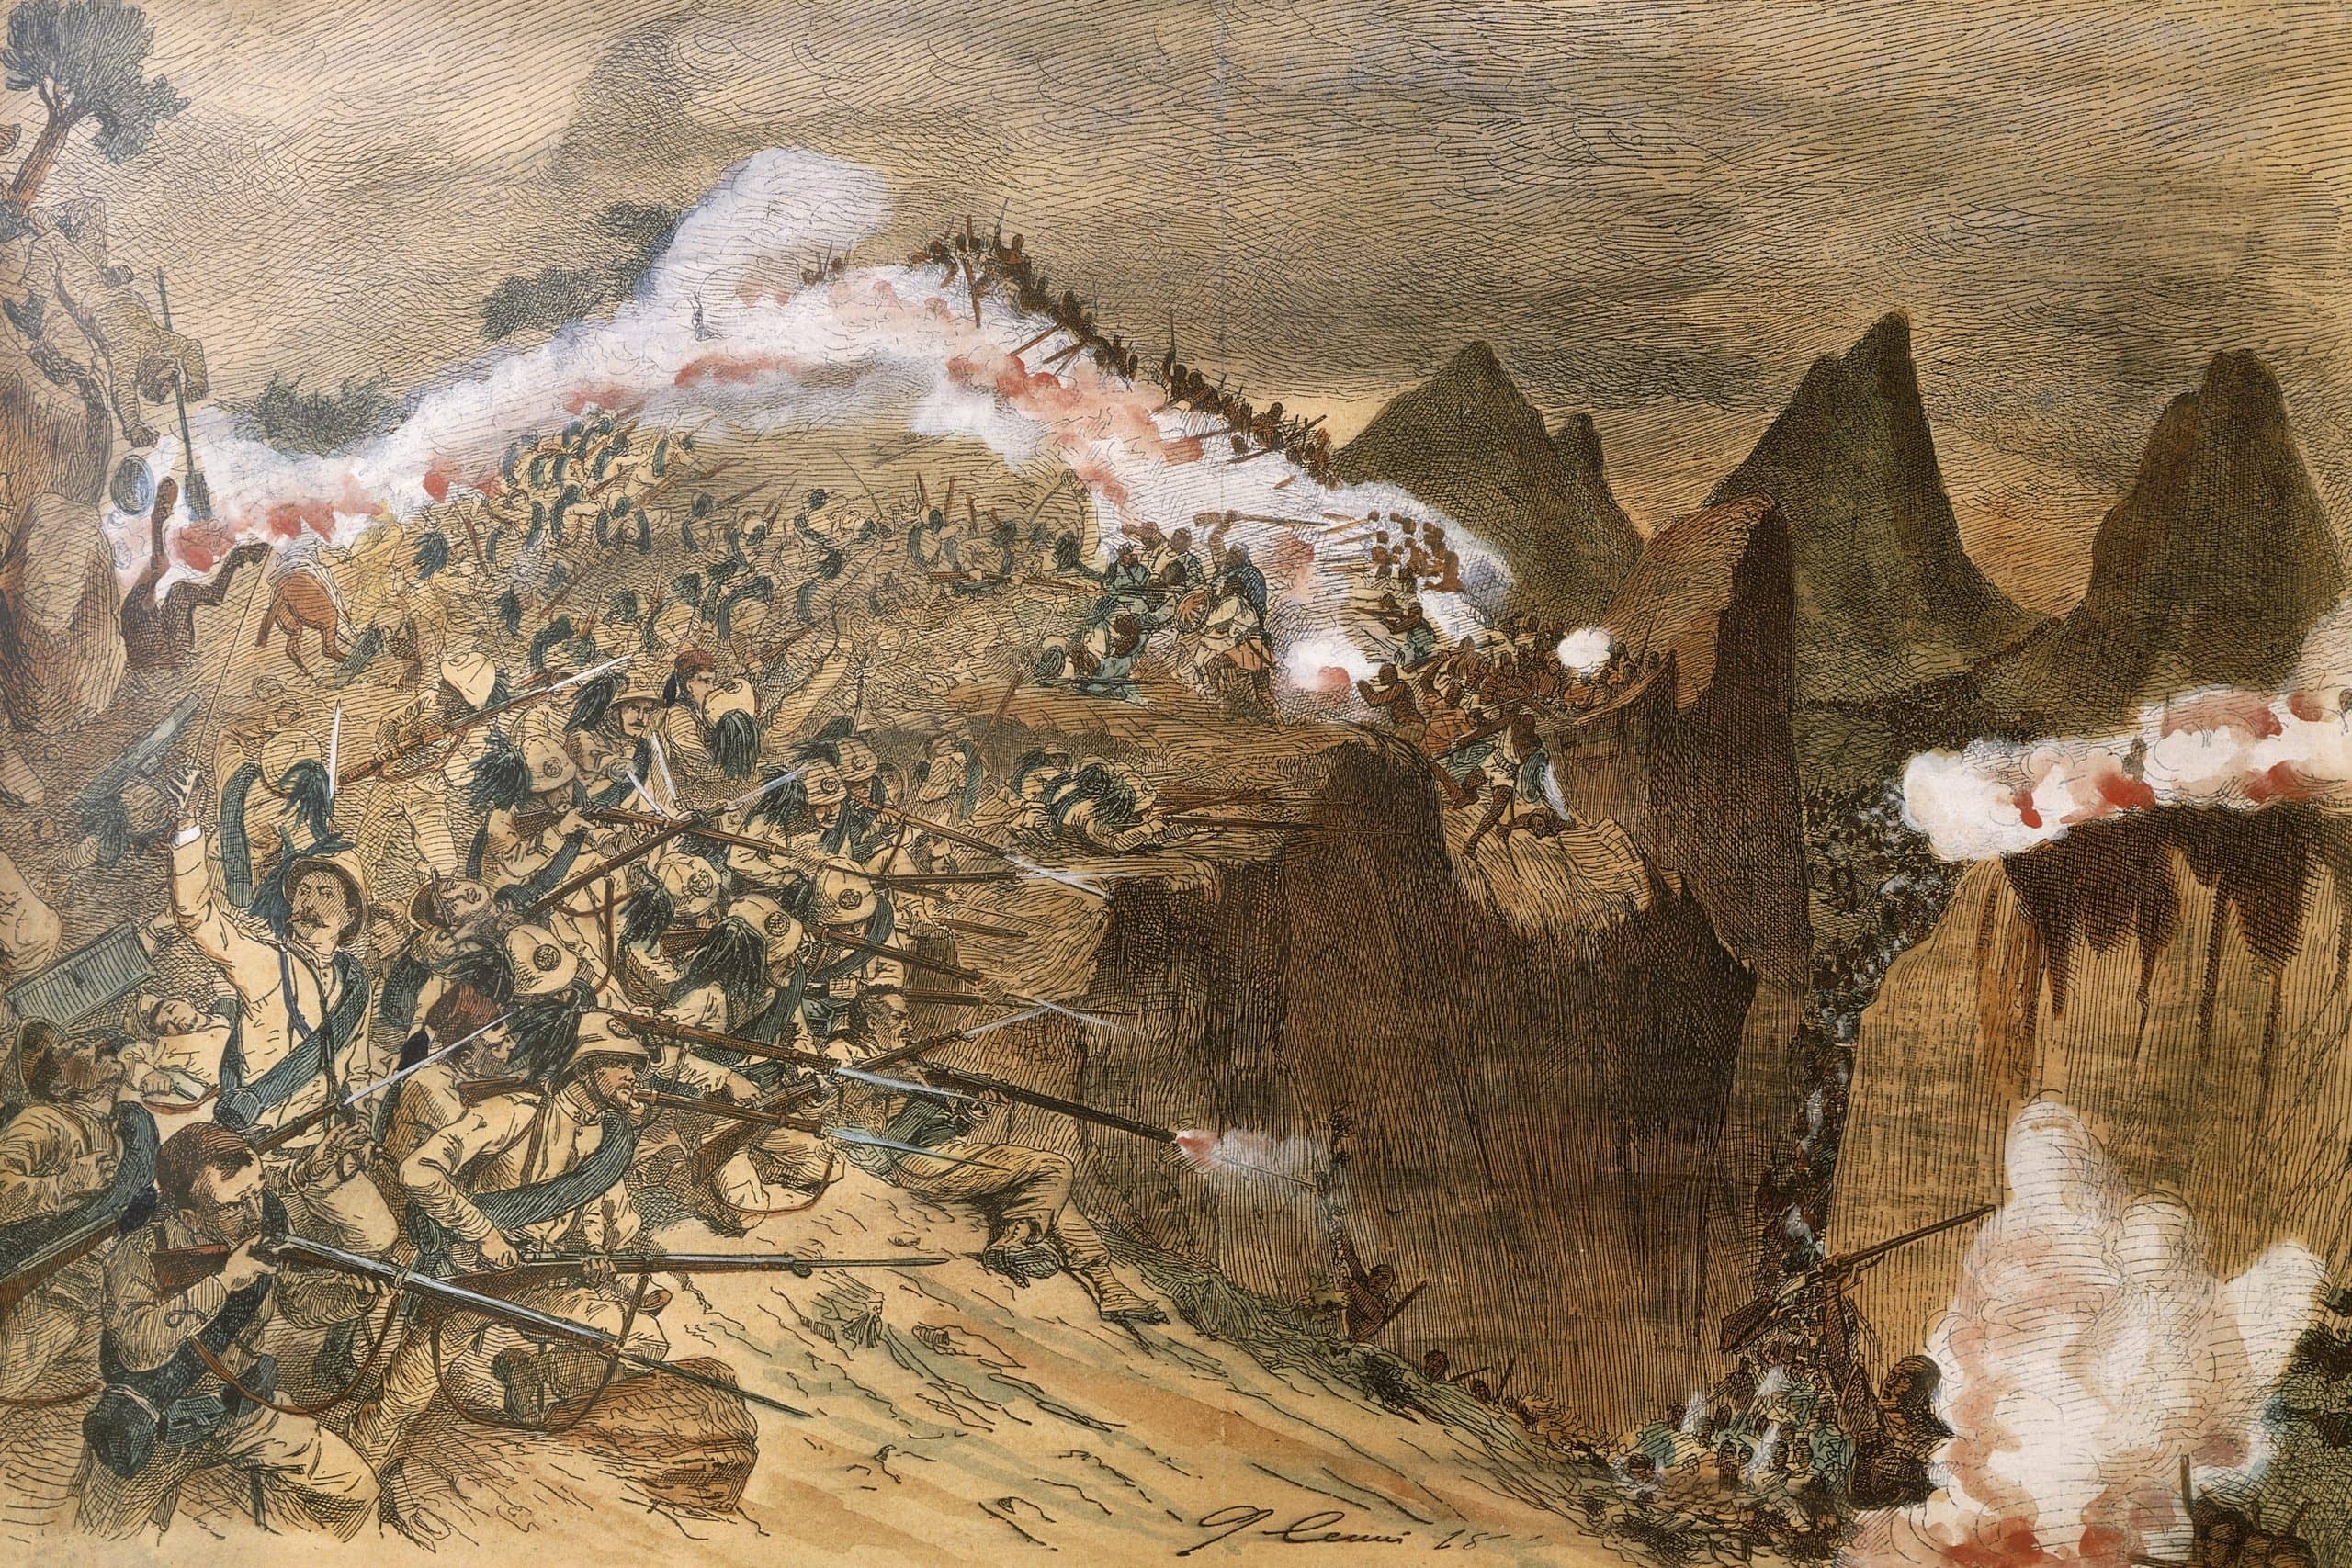 A historic painting capturing a battle scene with soldiers and horses, set against the backdrop of Adwa mountain.